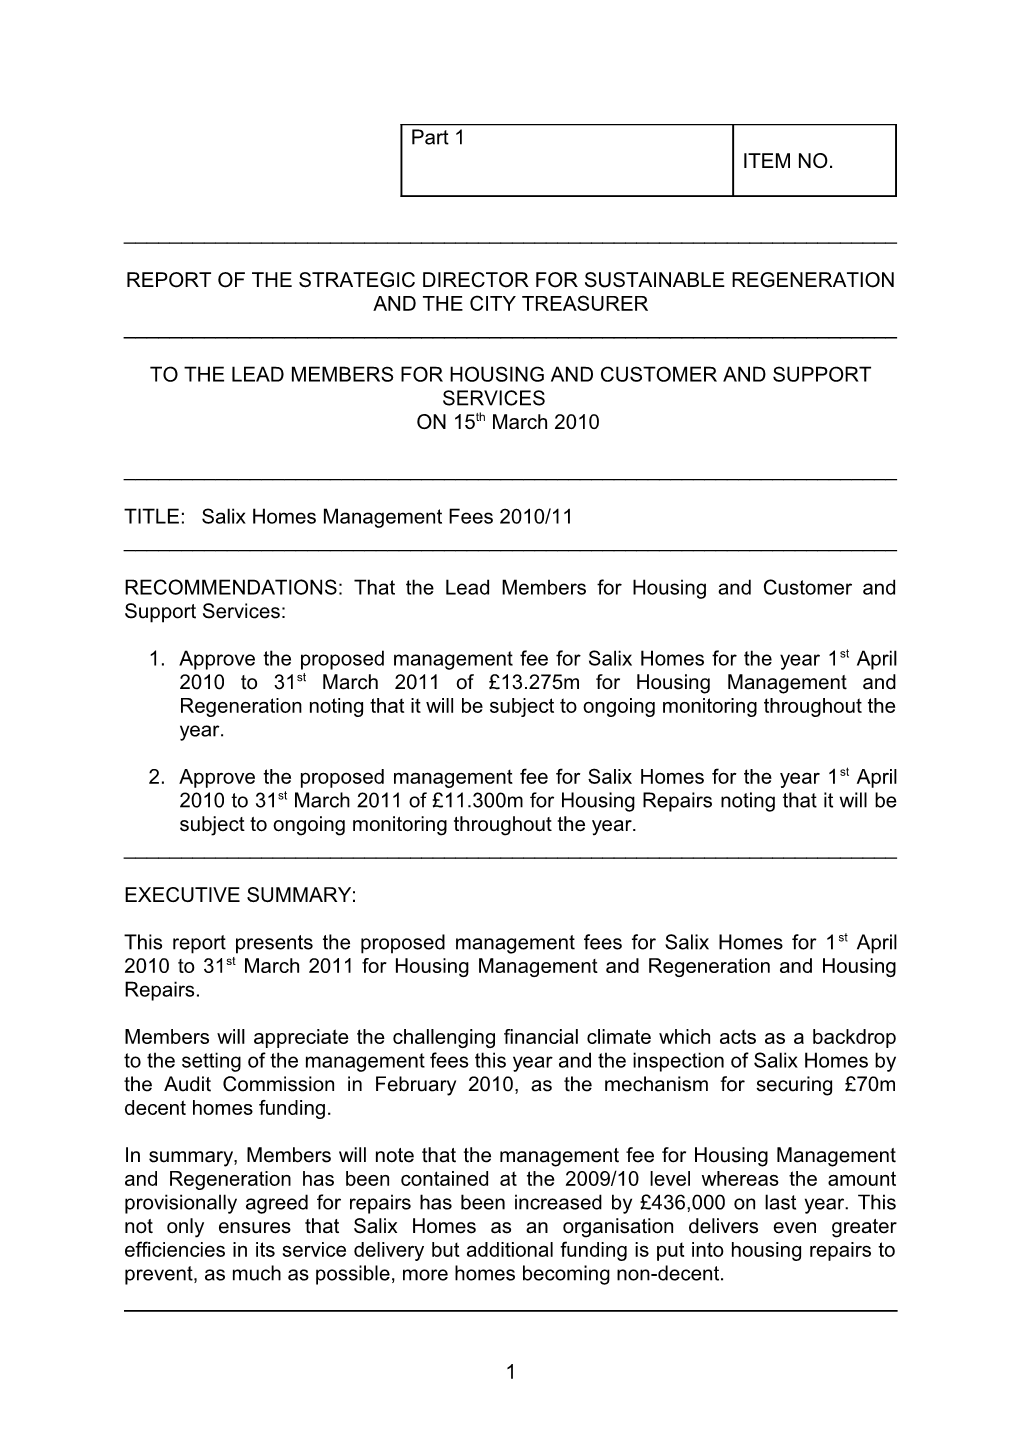 Report Ofthe Strategic Director for Sustainable Regeneration and the City Treasurer